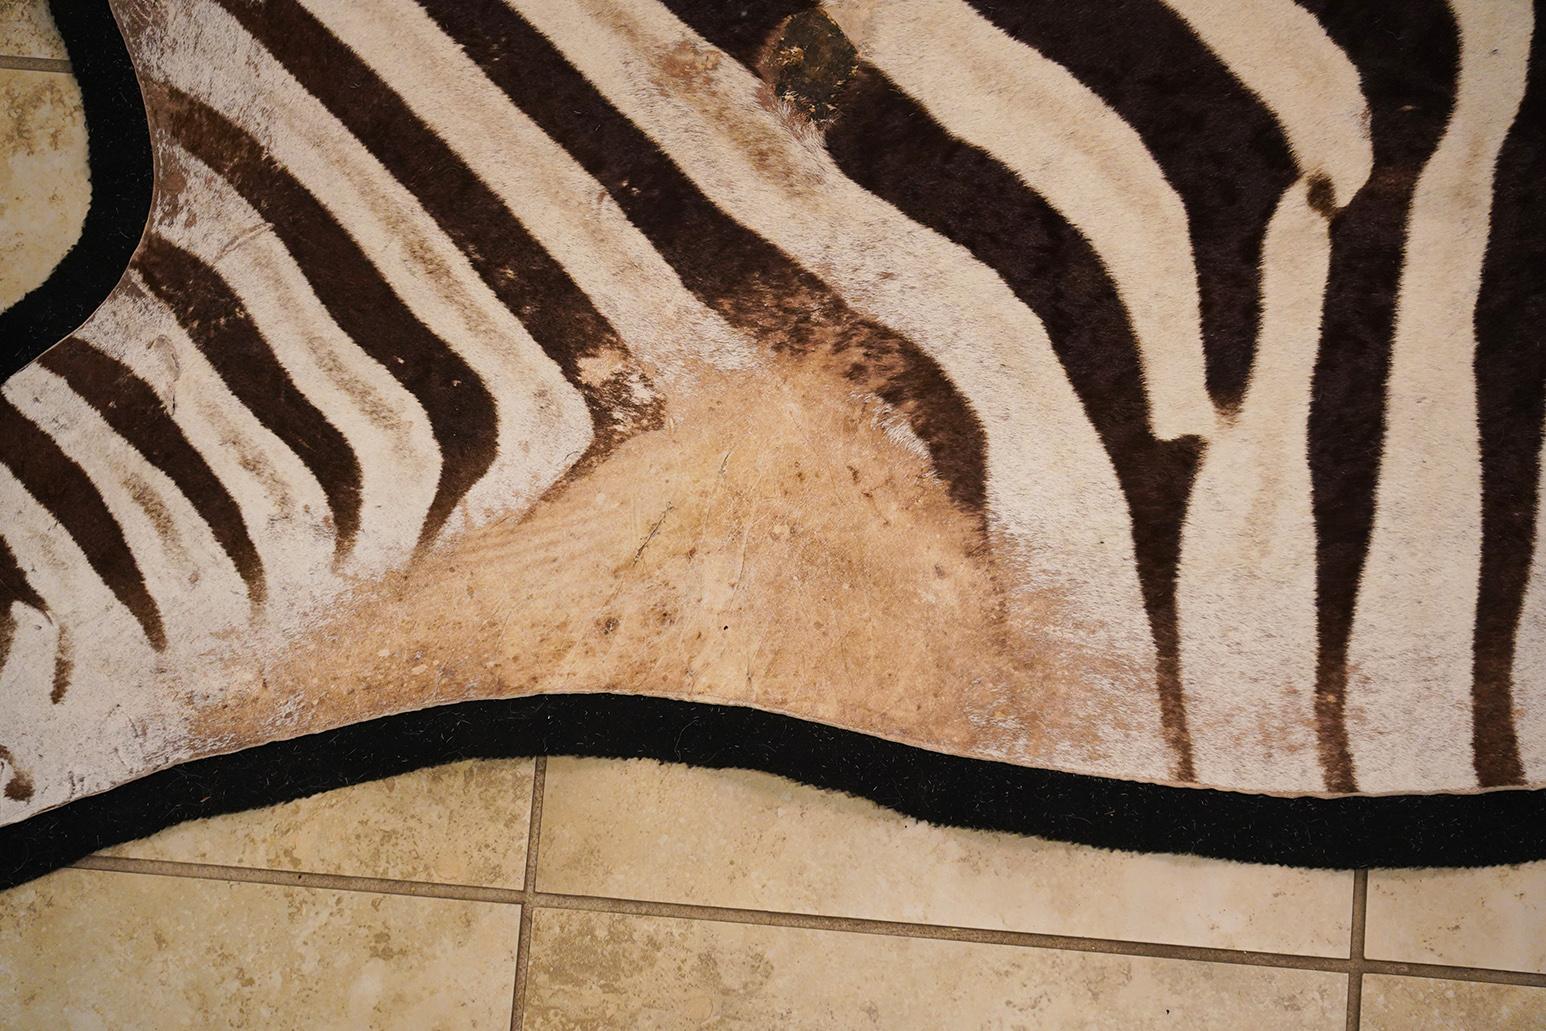 This Burchell Taxidermy zebra skin backed with felt as a rug is 112 inches long and 74 inches wide. It will add an exotic ambiance to any interior in which it is placed.